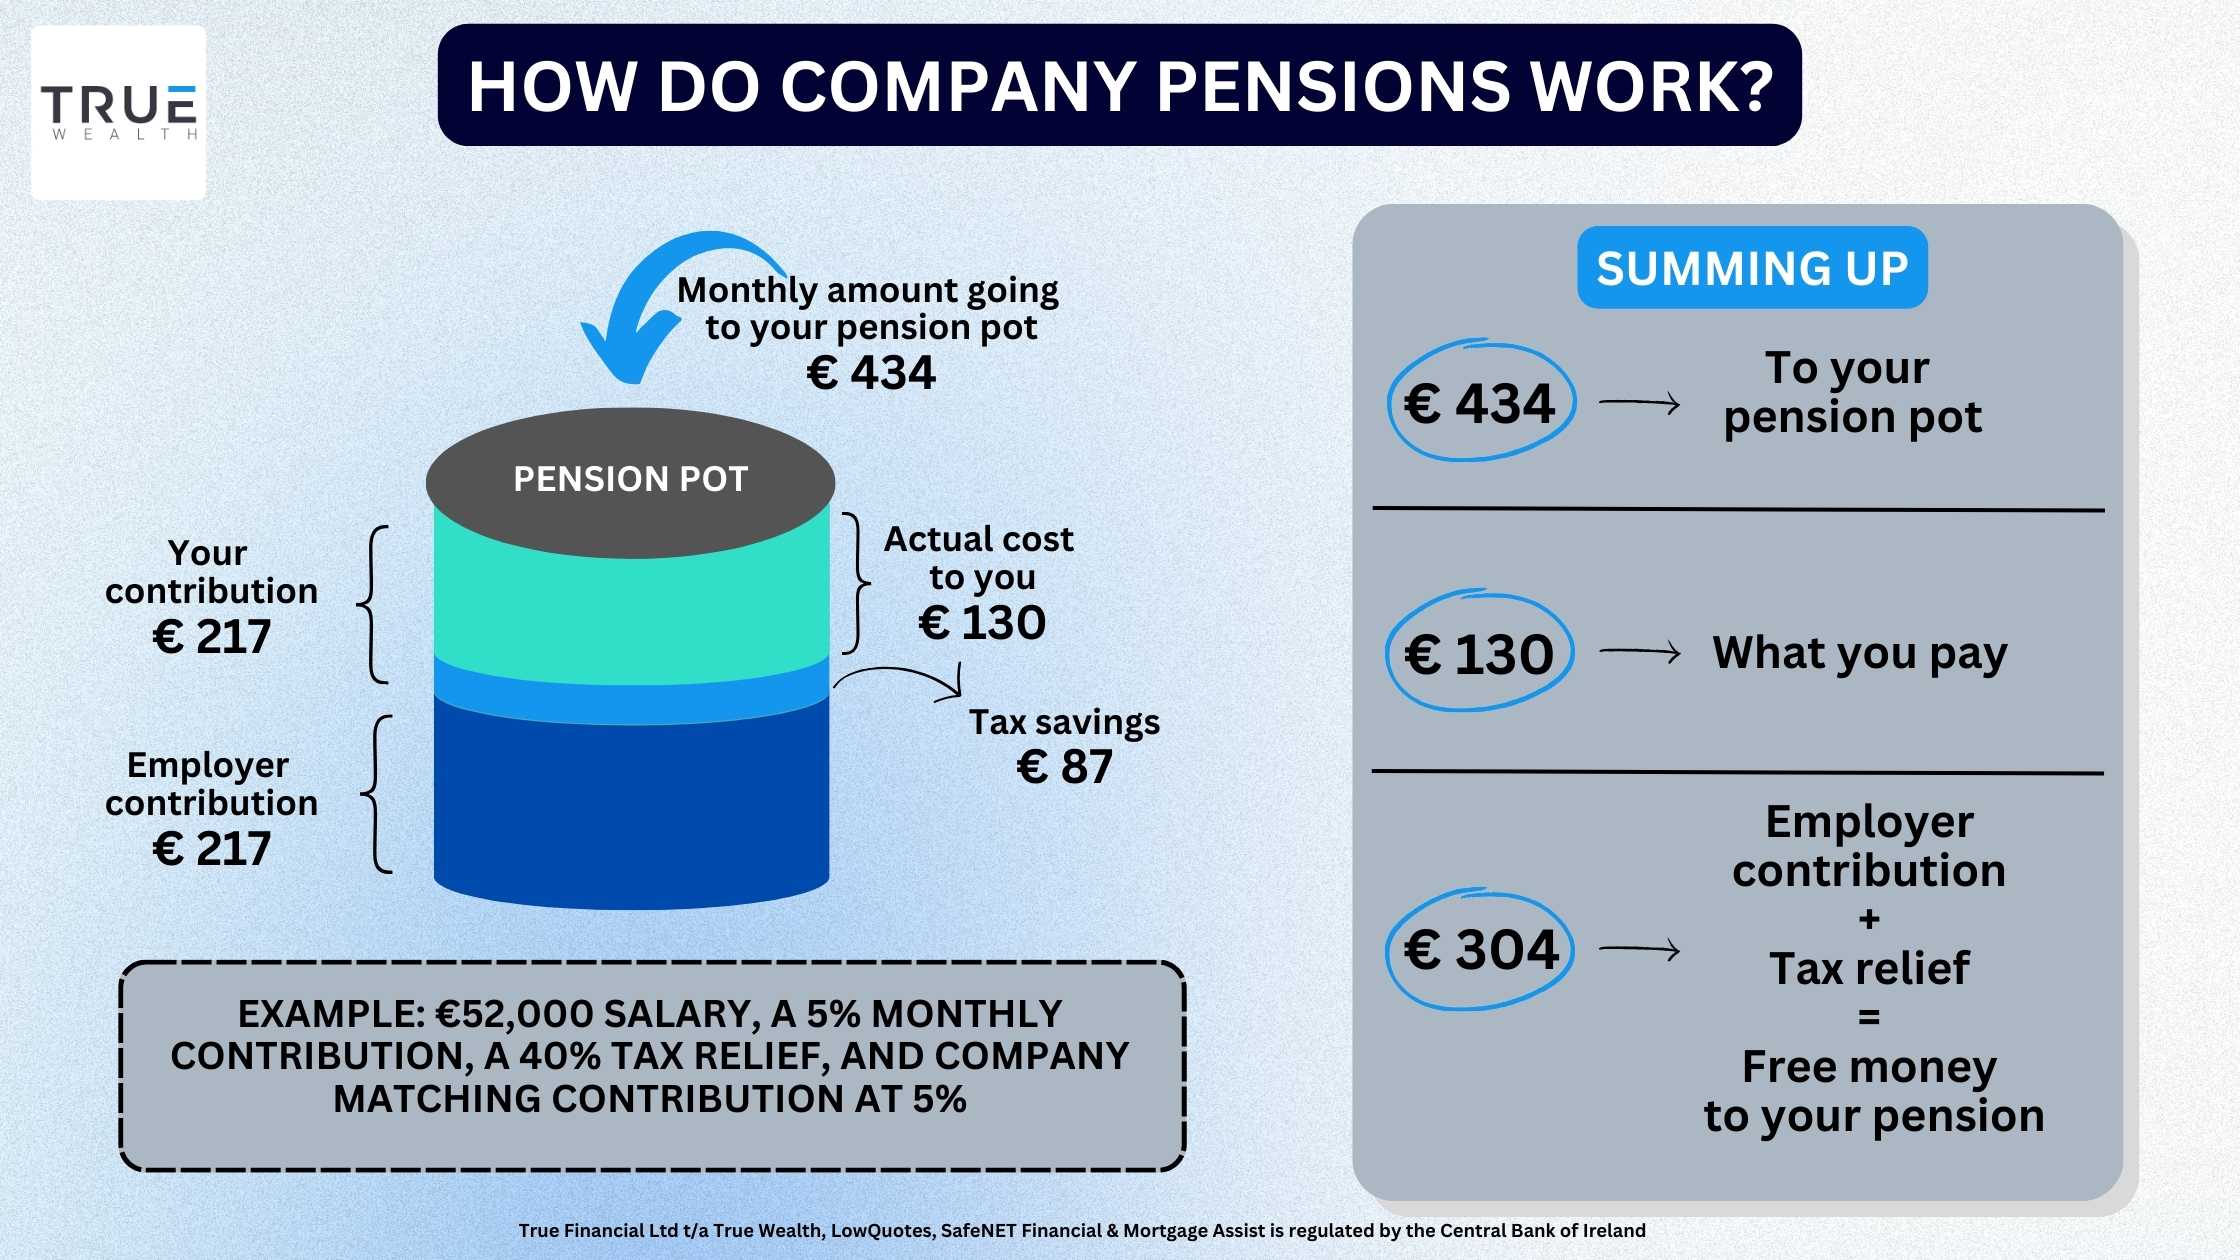 How do company pensions work? - True Wealth